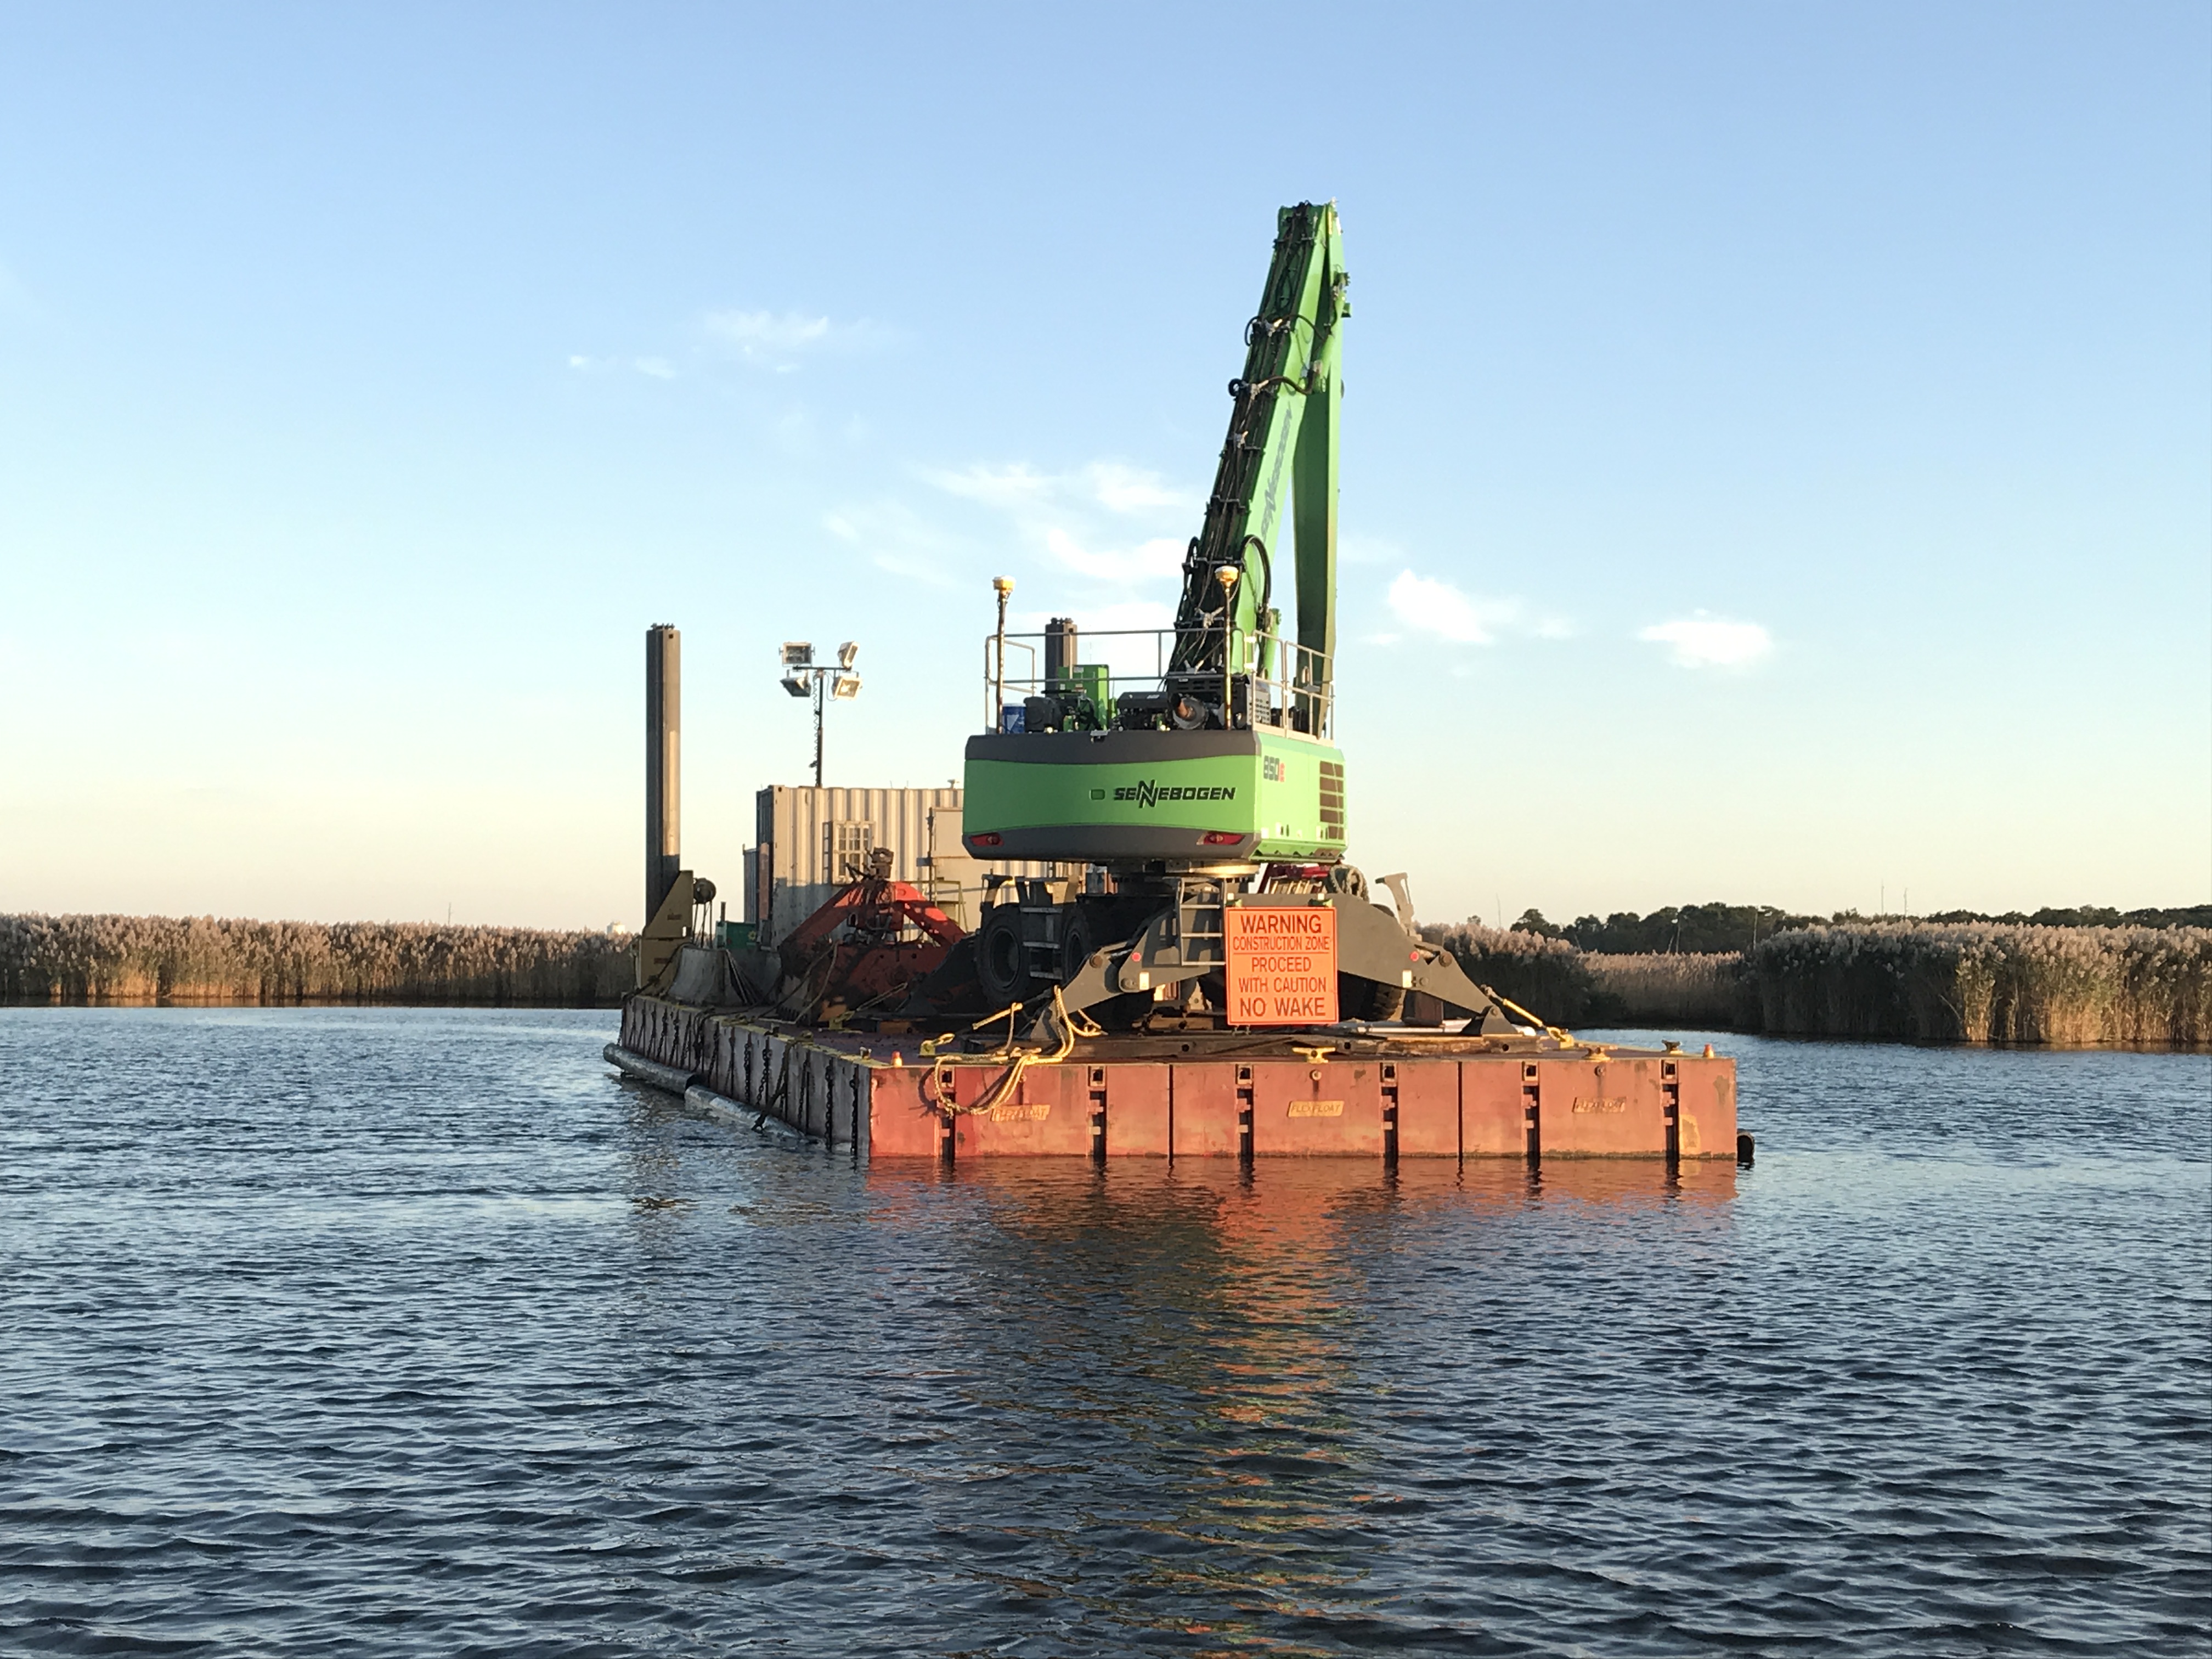 A dredge barge rests in the narrows of the Metedeconk River on Oct. 15, 2019. (Photo: Daniel Nee)